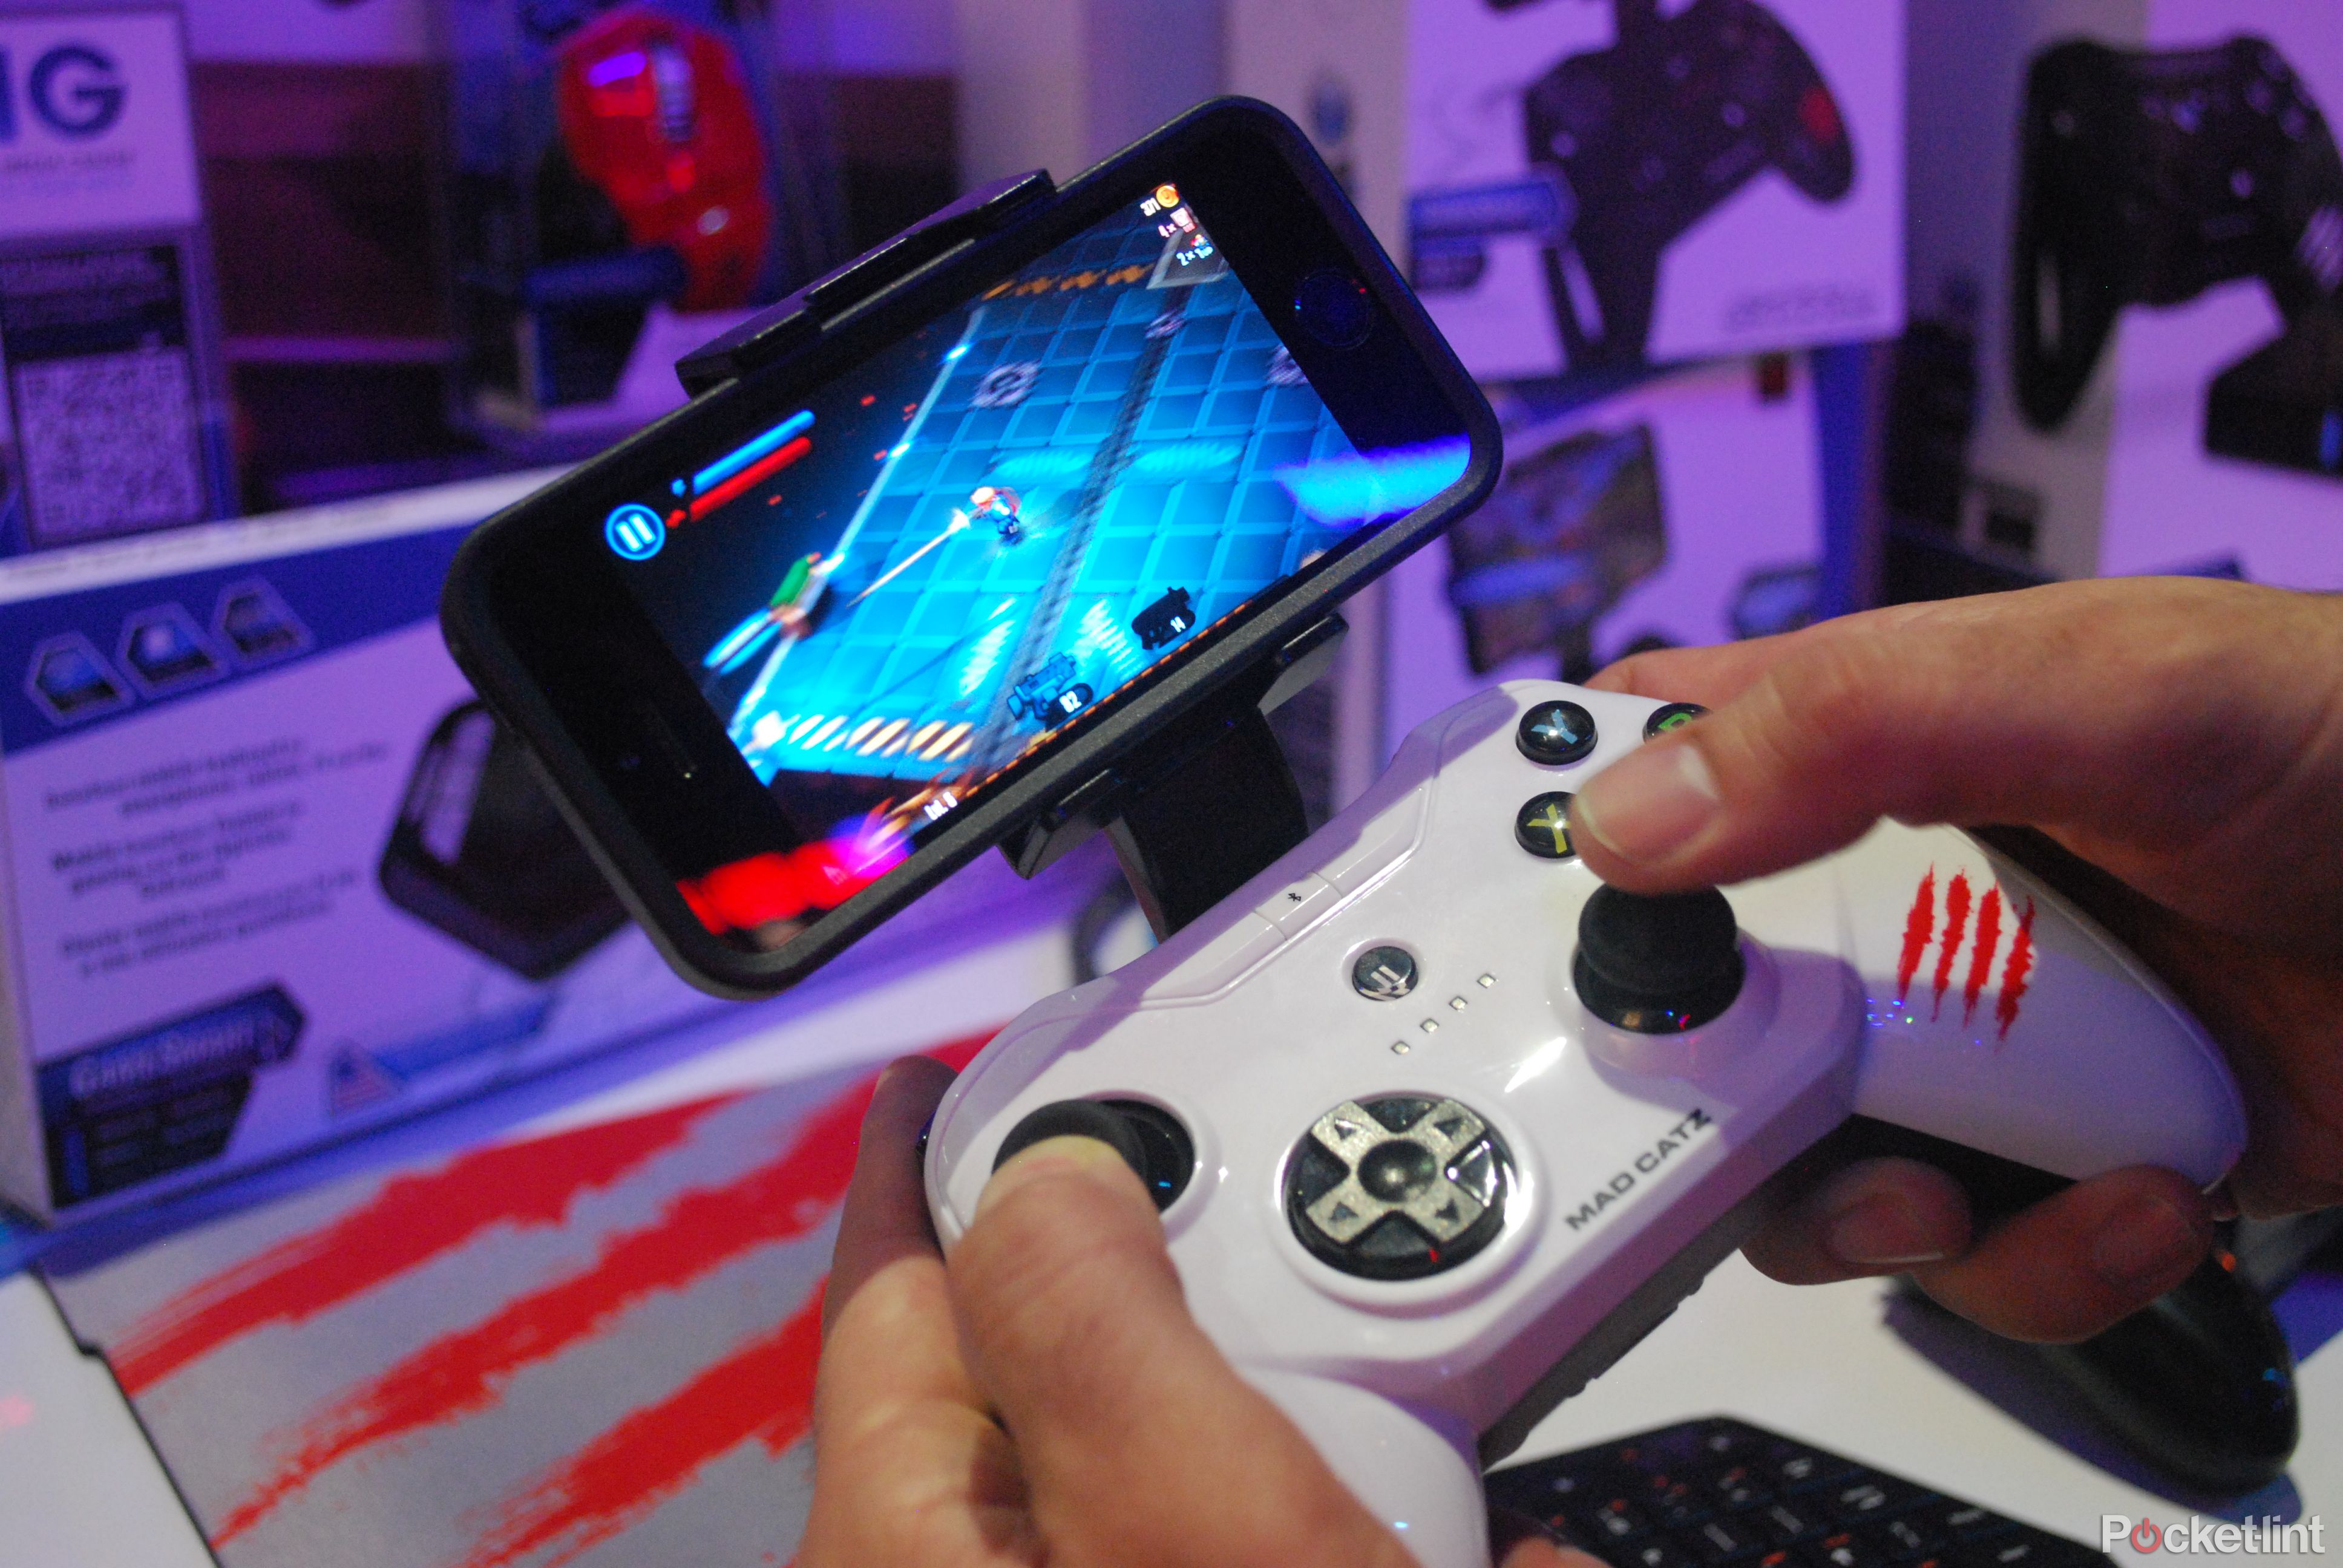 mad catz ctrli gamepad for iphone and strike m wireless keyboard pictures and hands on image 1